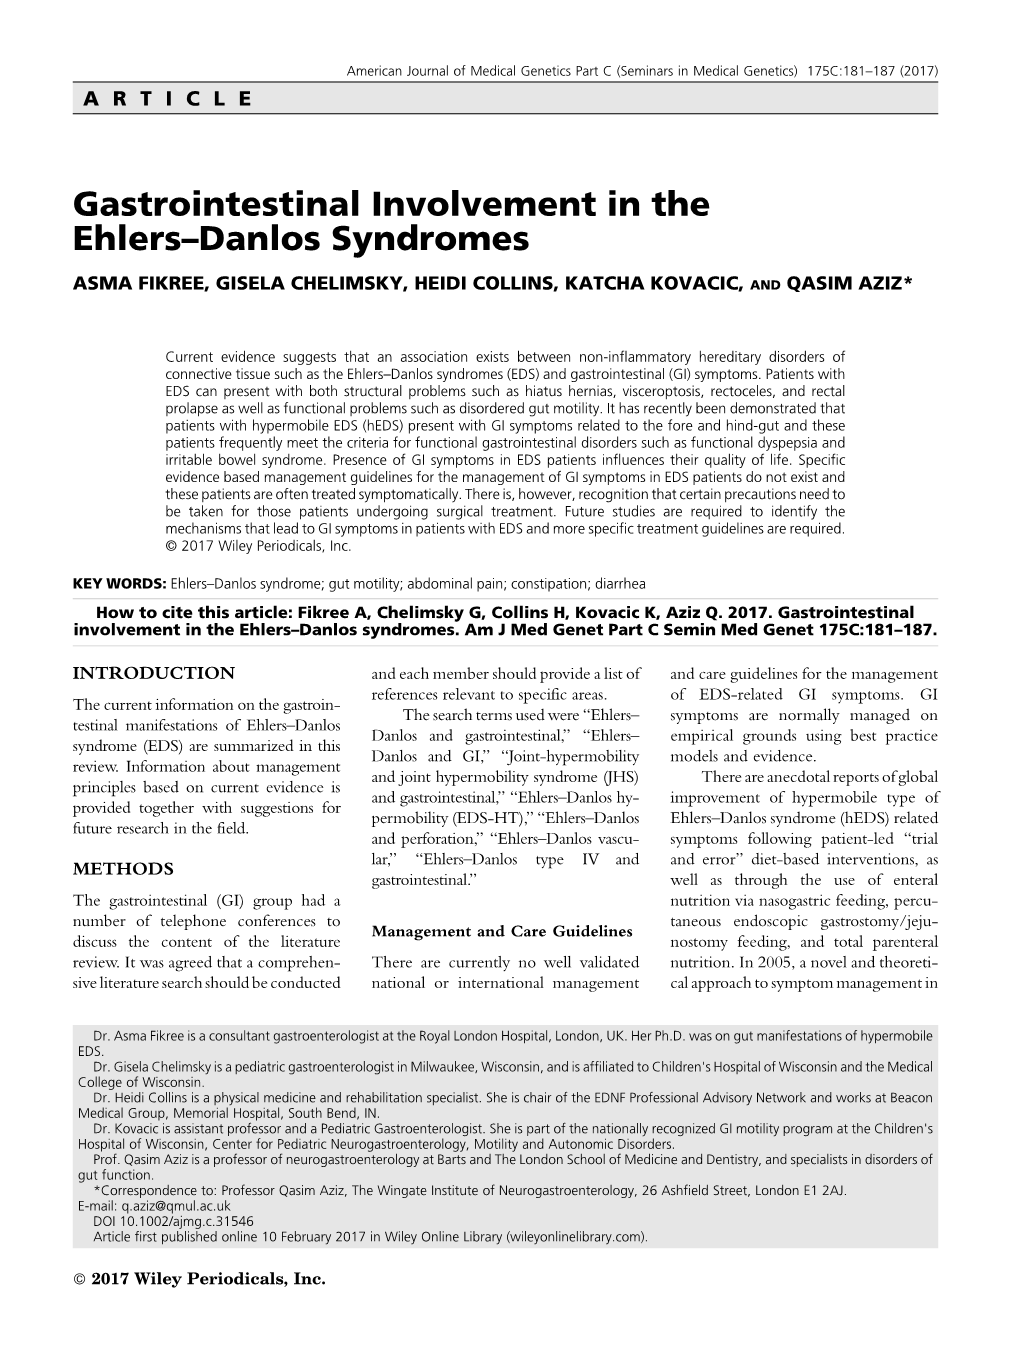 Gastrointestinal Involvement in the Ehlers-Danlos Syndromes